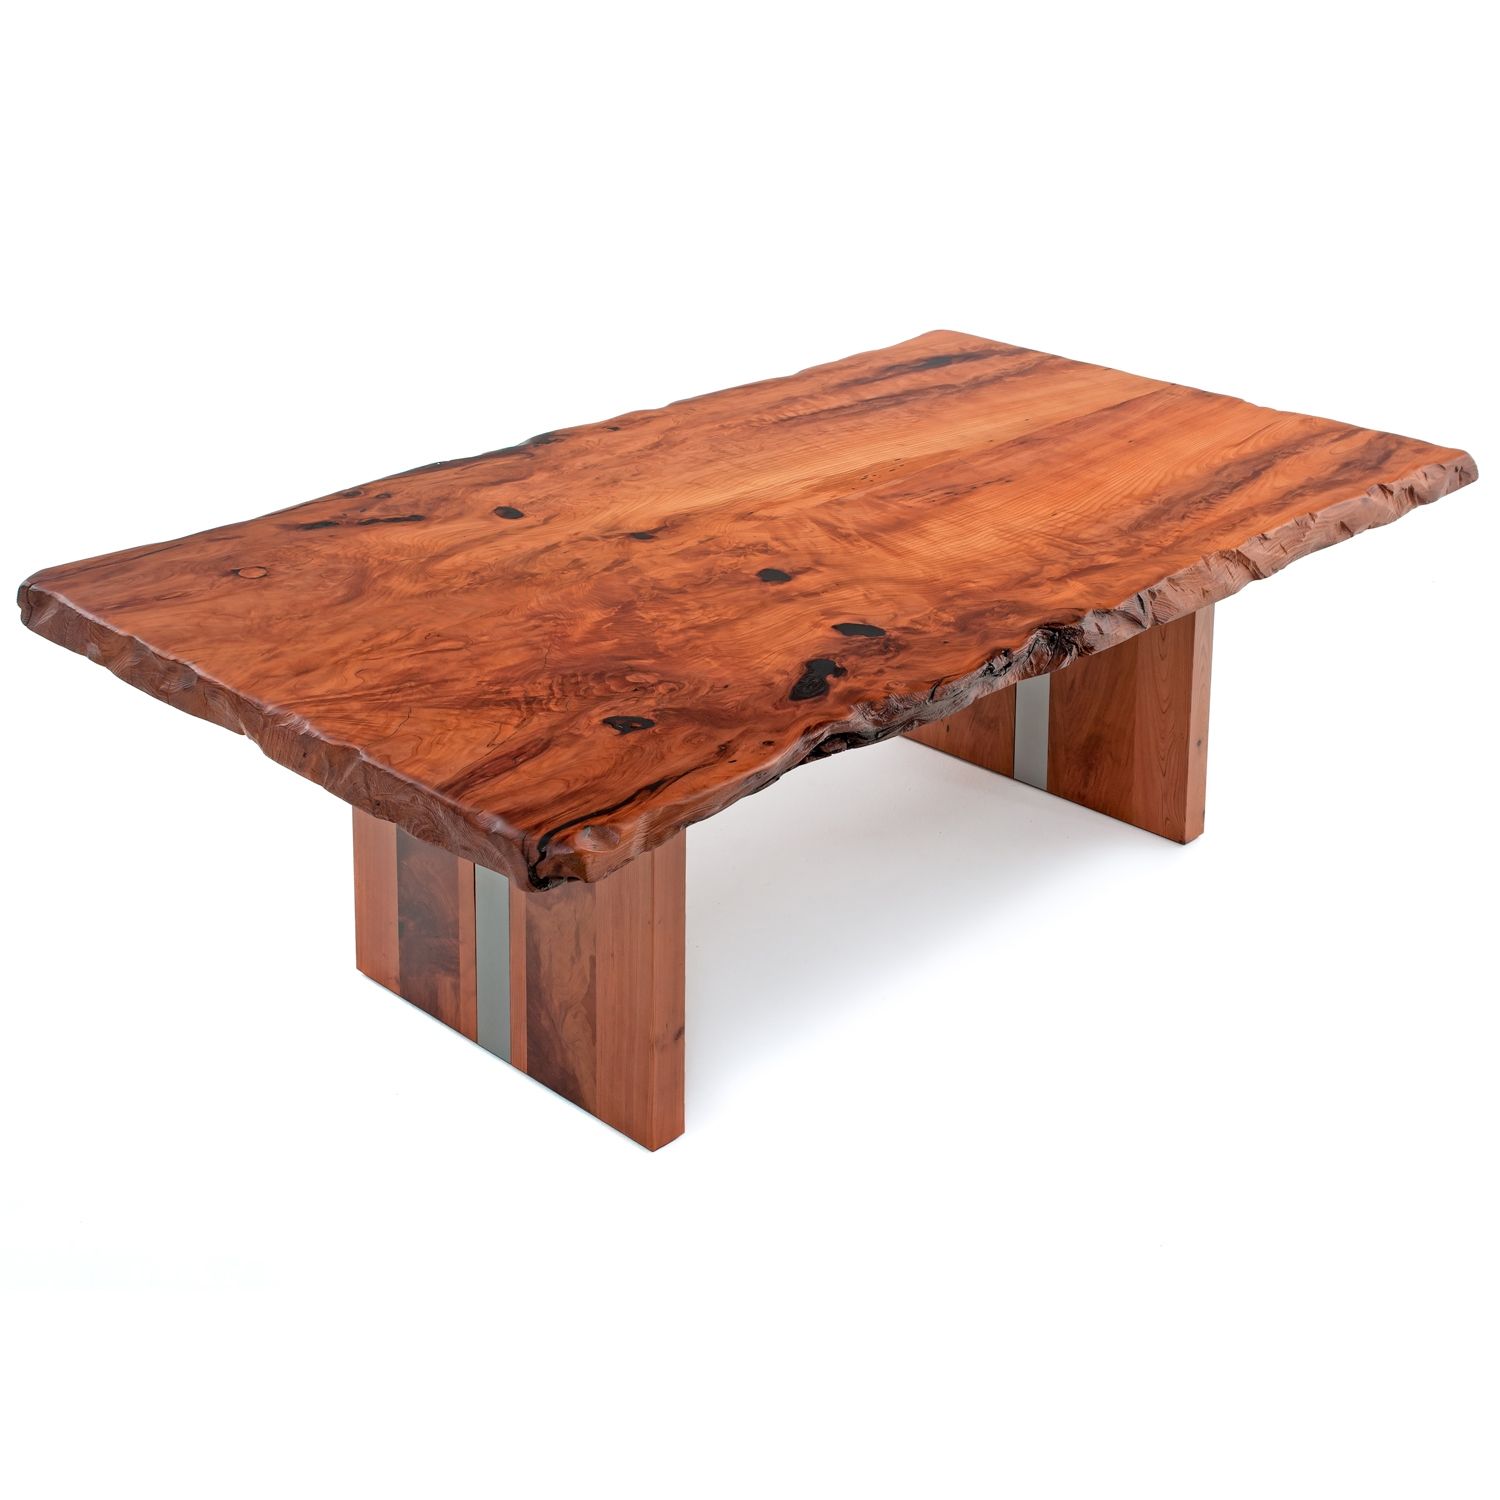 Heavy Duty Wood Workshop Table - Solid Redwood Table